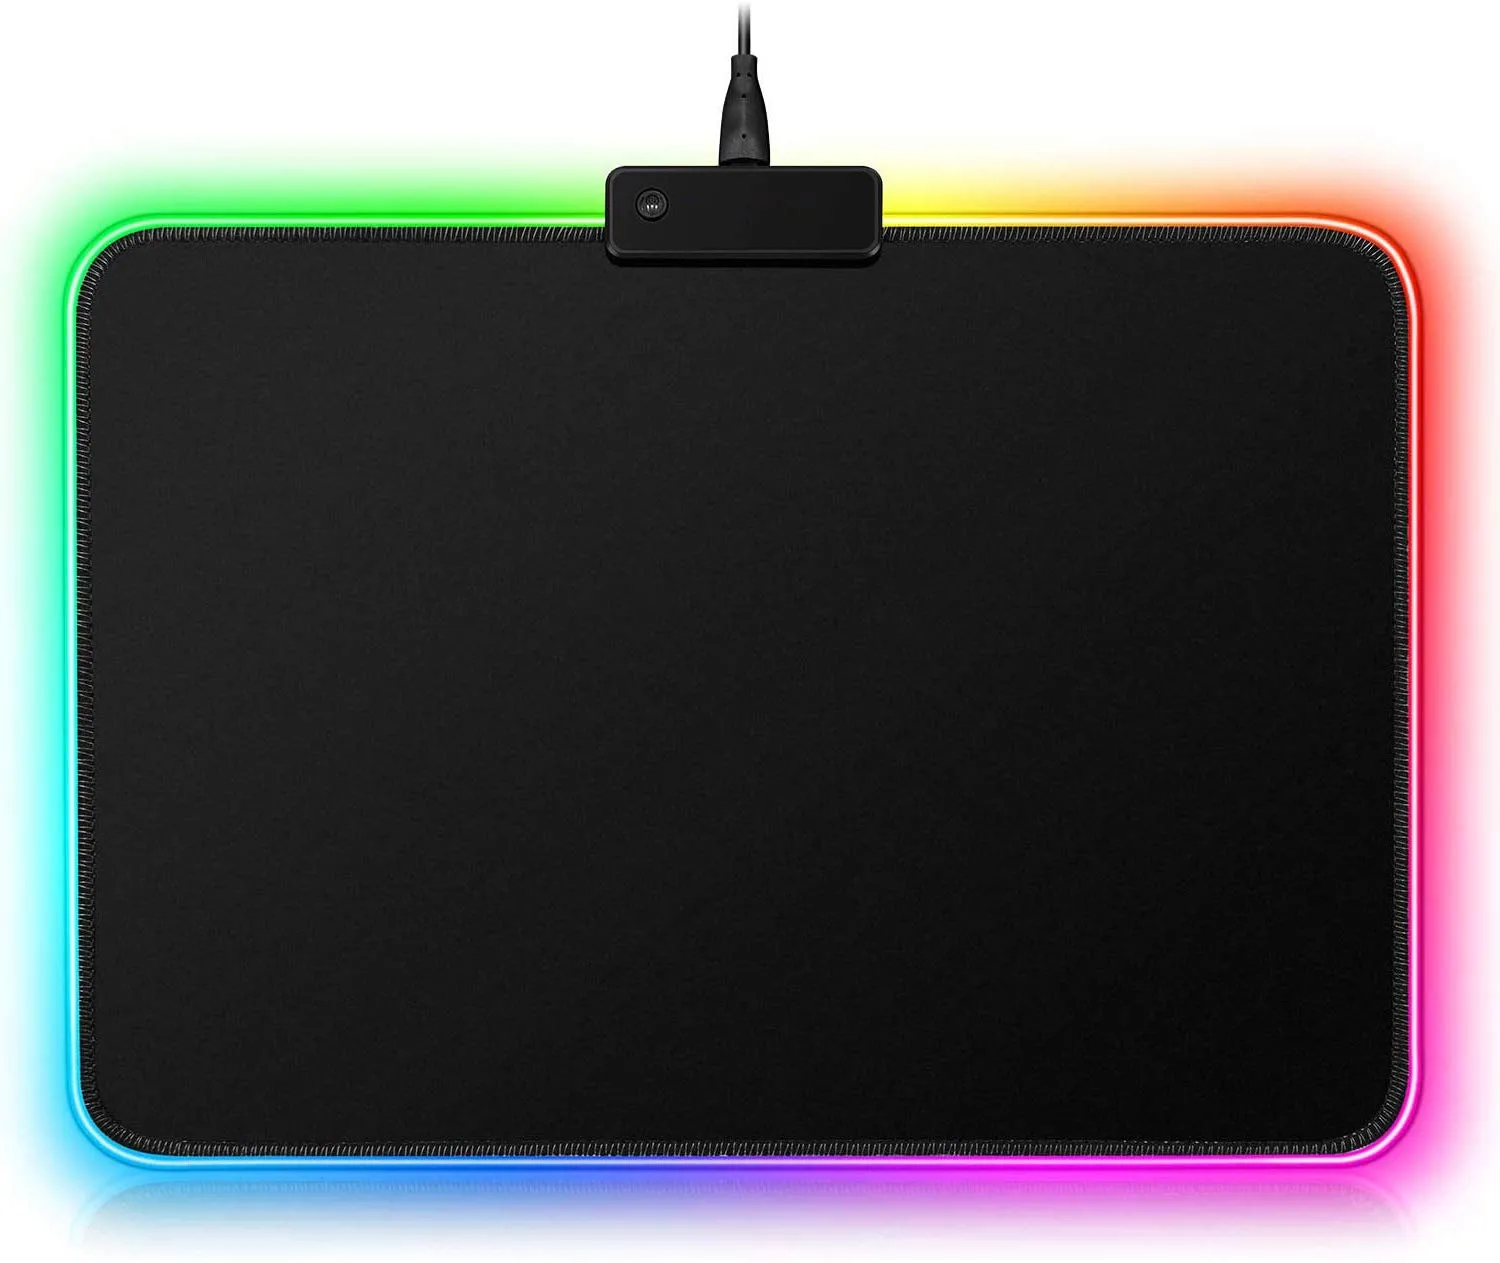 Custom Extended Large Mouse pad RGB LED Glowing Keyboard Mat Natural Rubber Gaming MousePad Gamer Computer Accessories